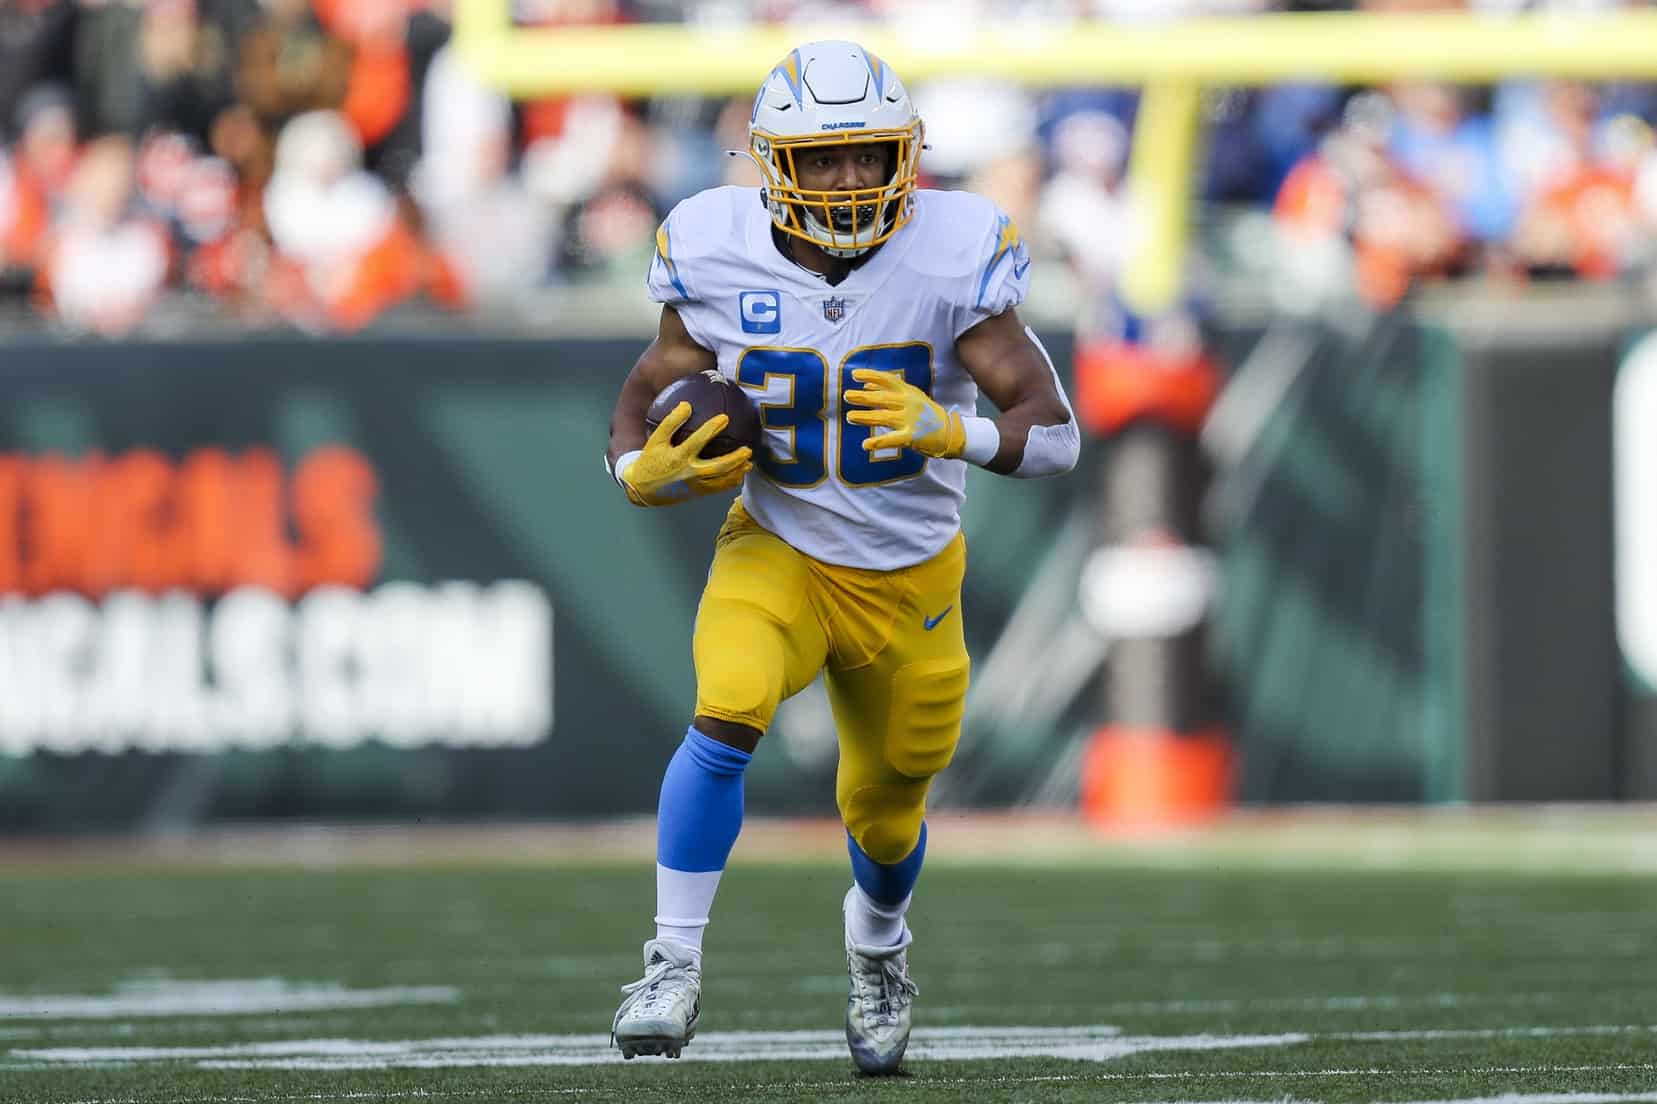 Chargers injury update: TE Donald Parham stretchered off field